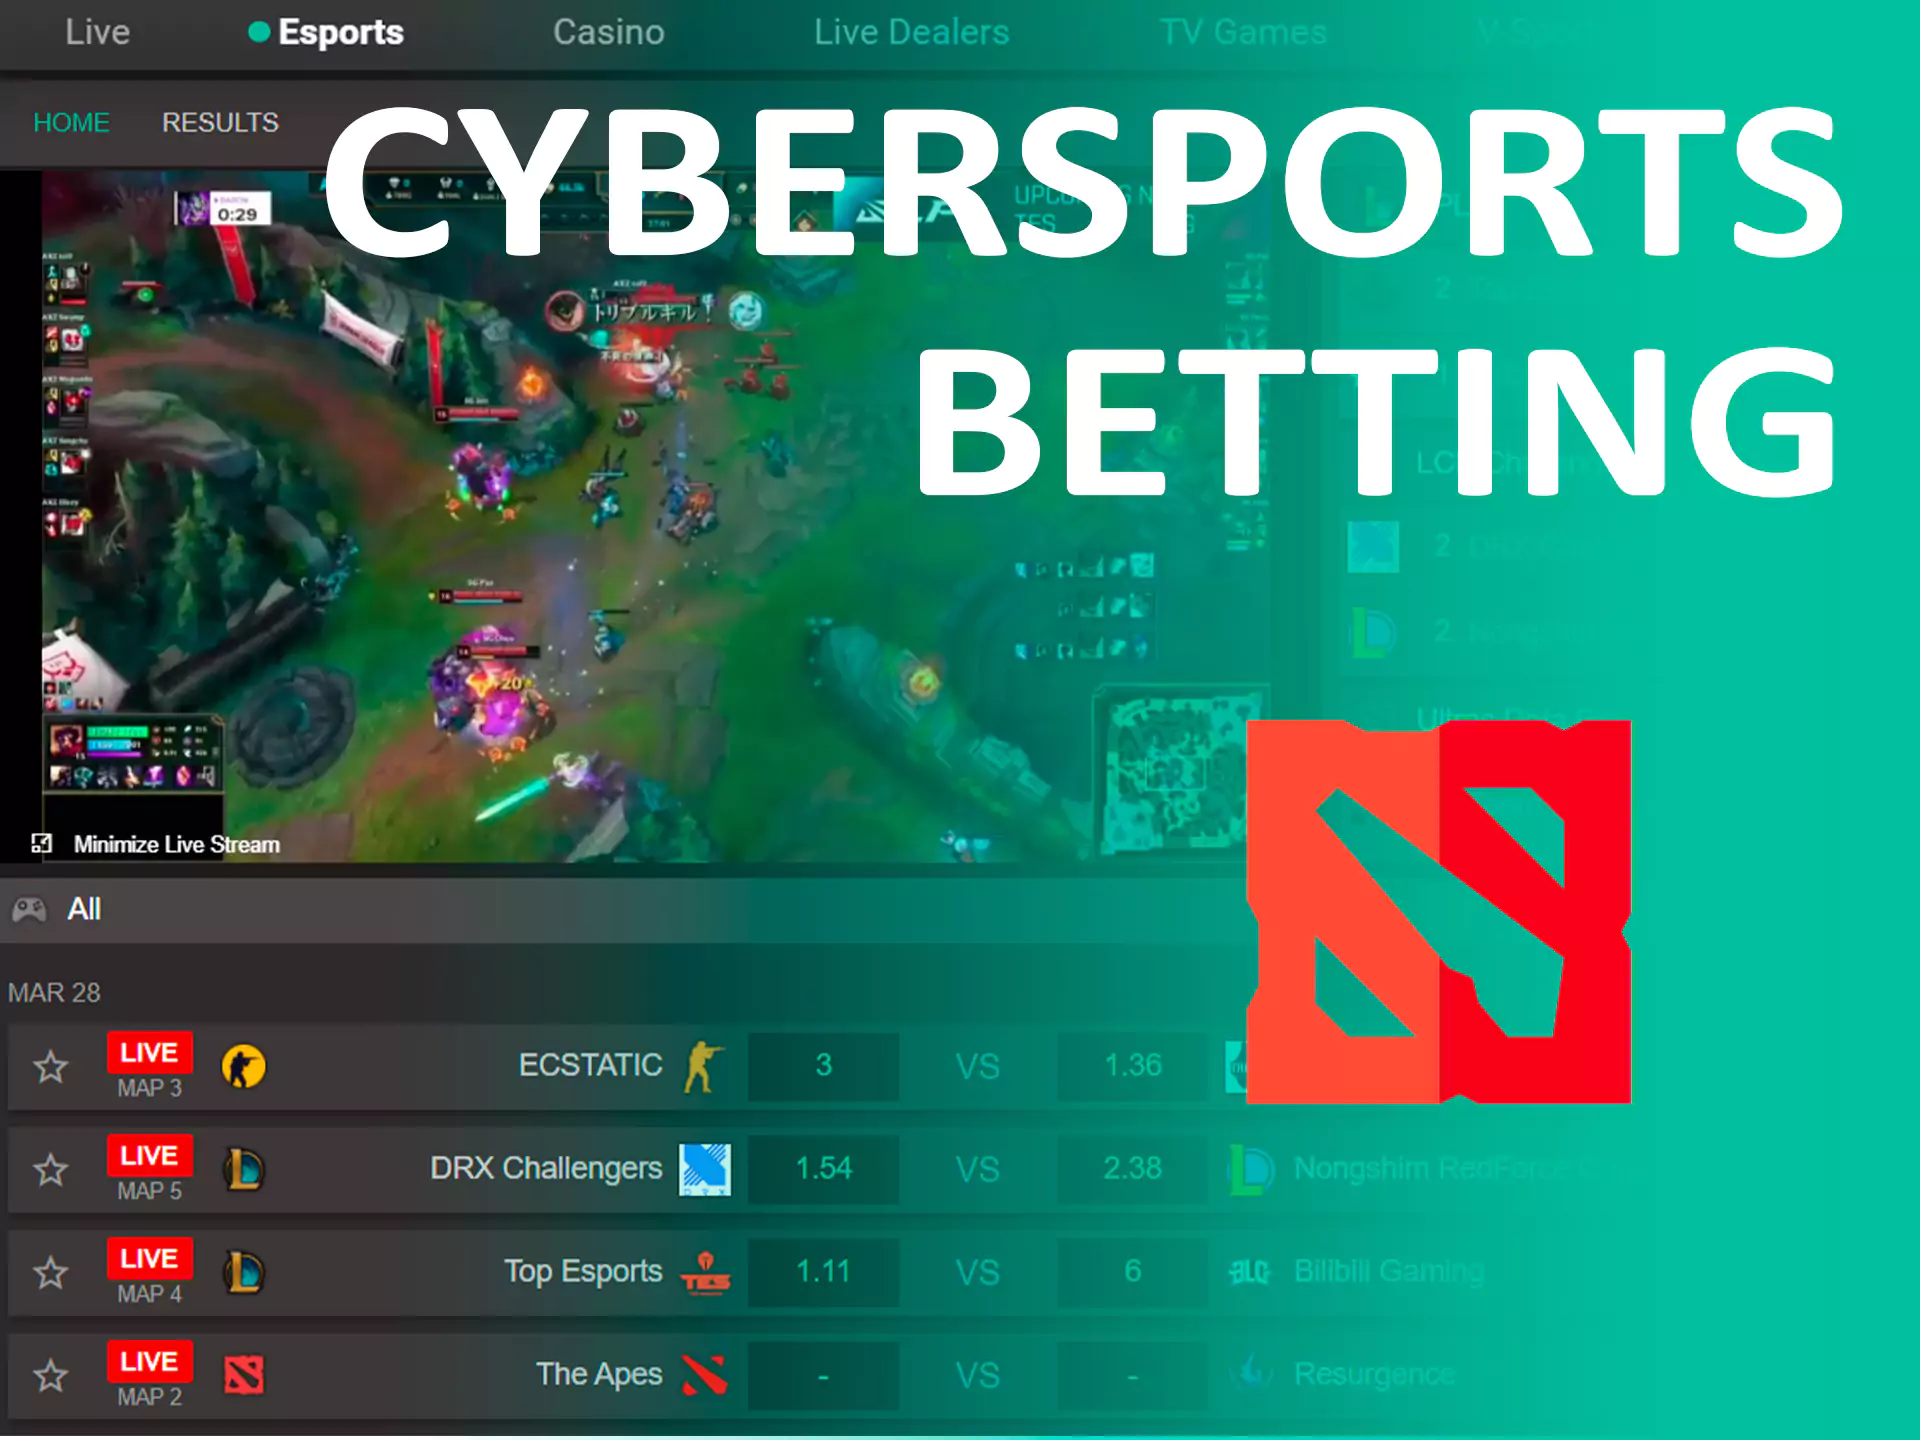 You can also bet on cybersport at Pin-Up.